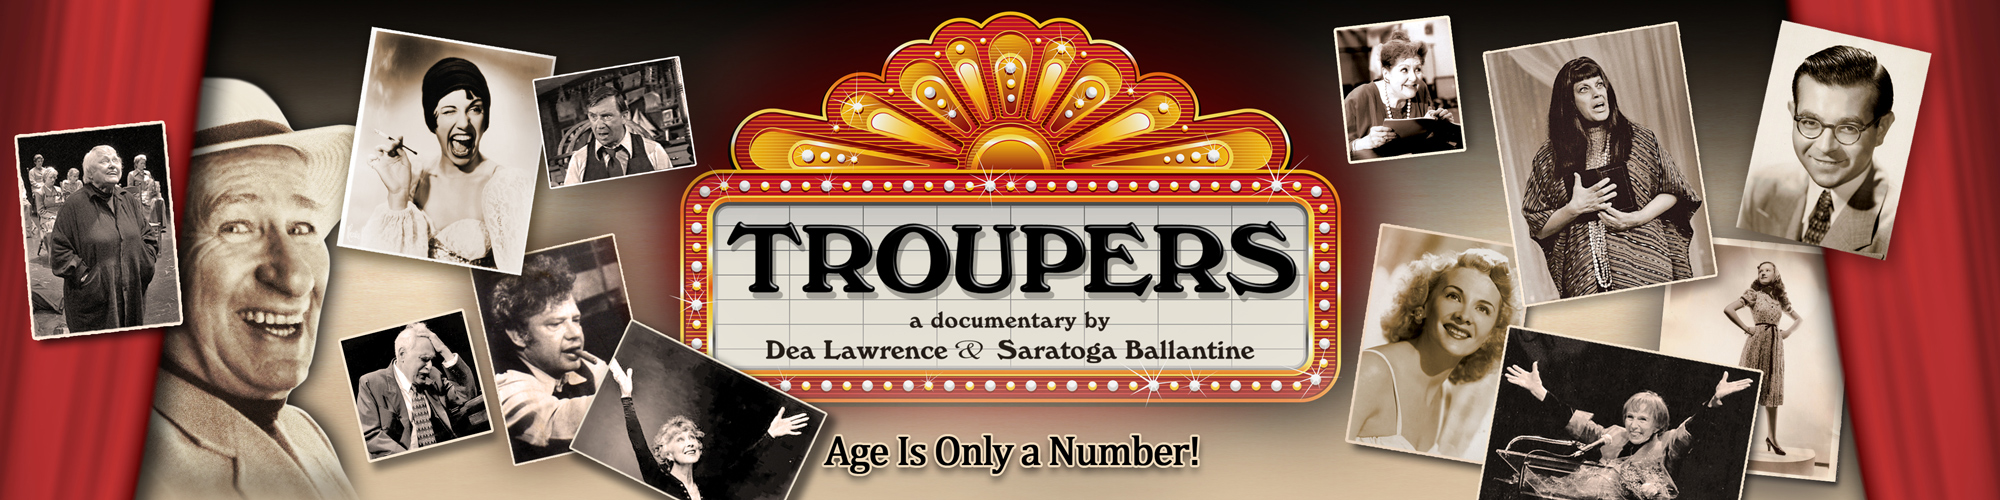 Troupers_documentary_actorslife_banner